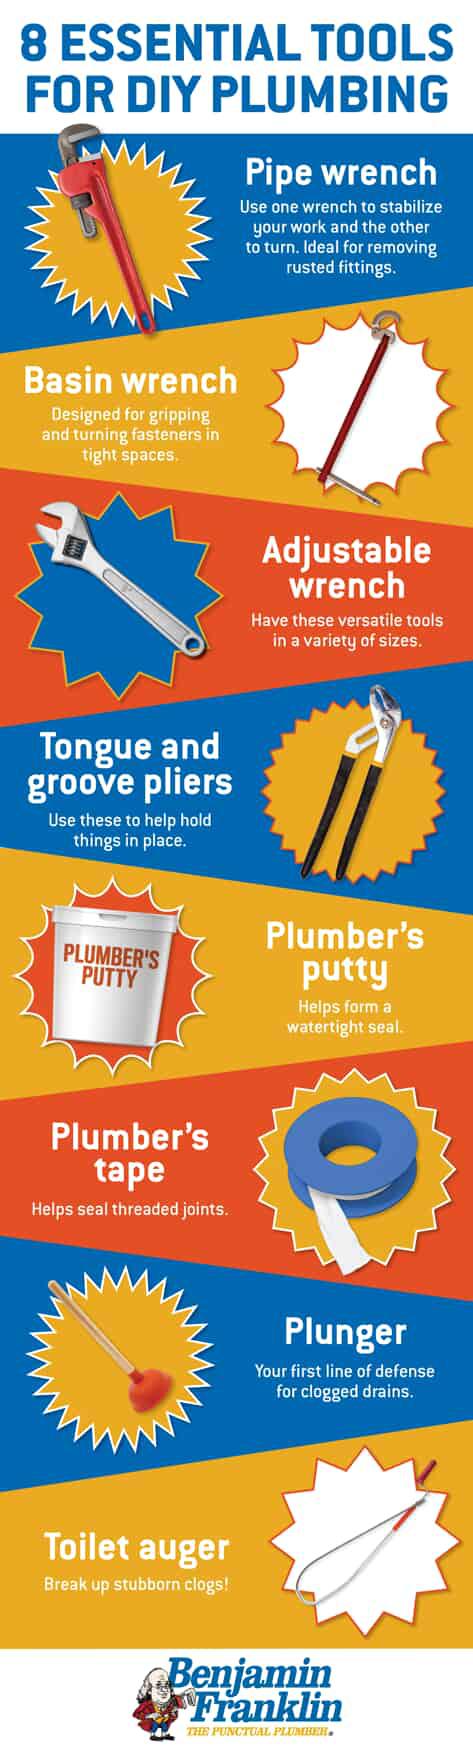 infographic depicting 8 essential tools for DIY plumbing